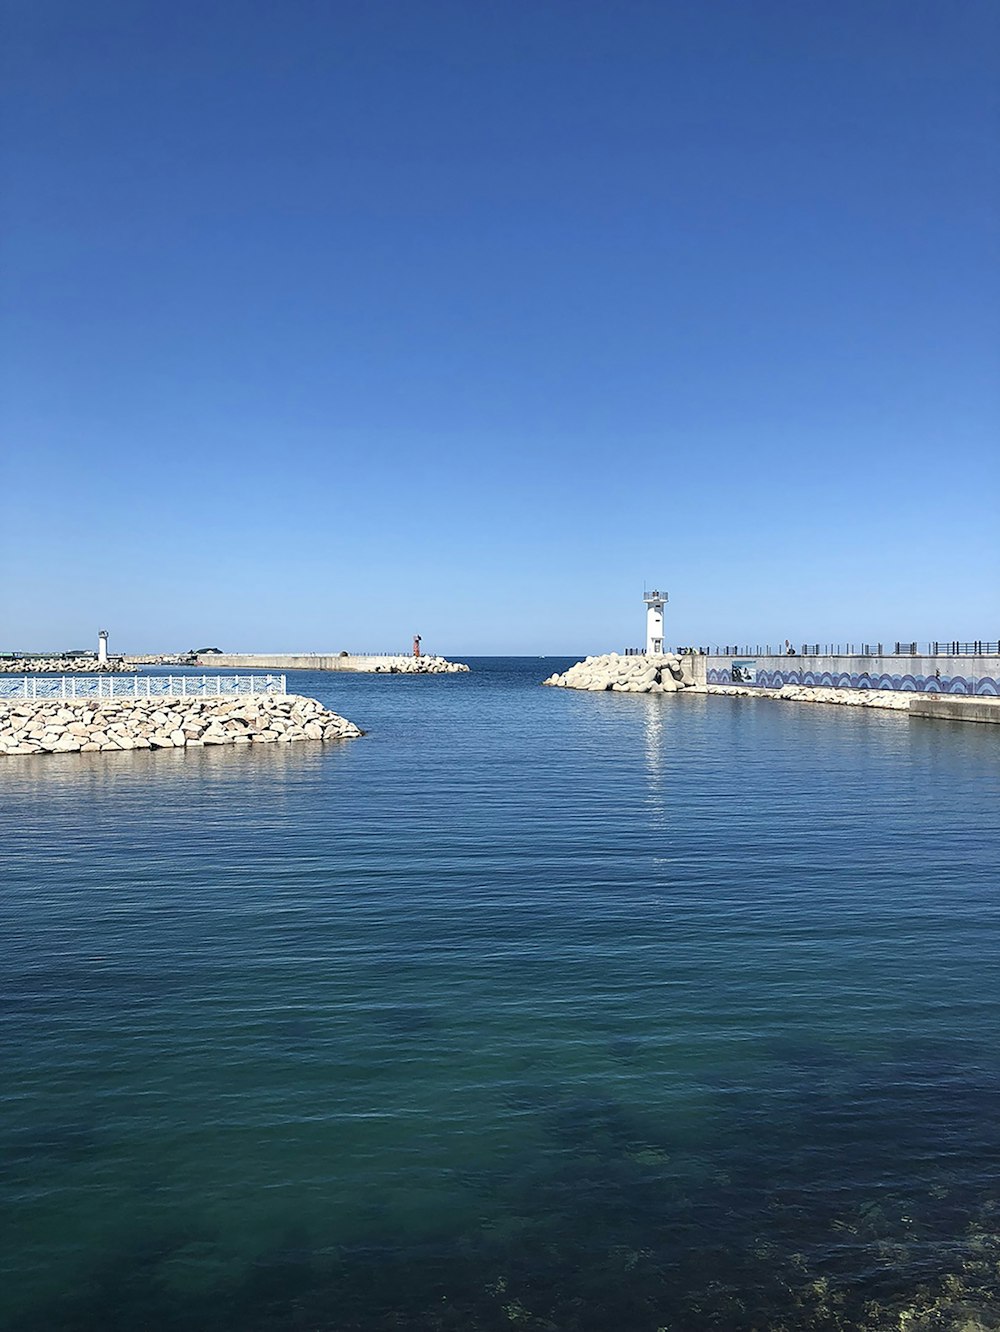 a body of water with a light house in the distance